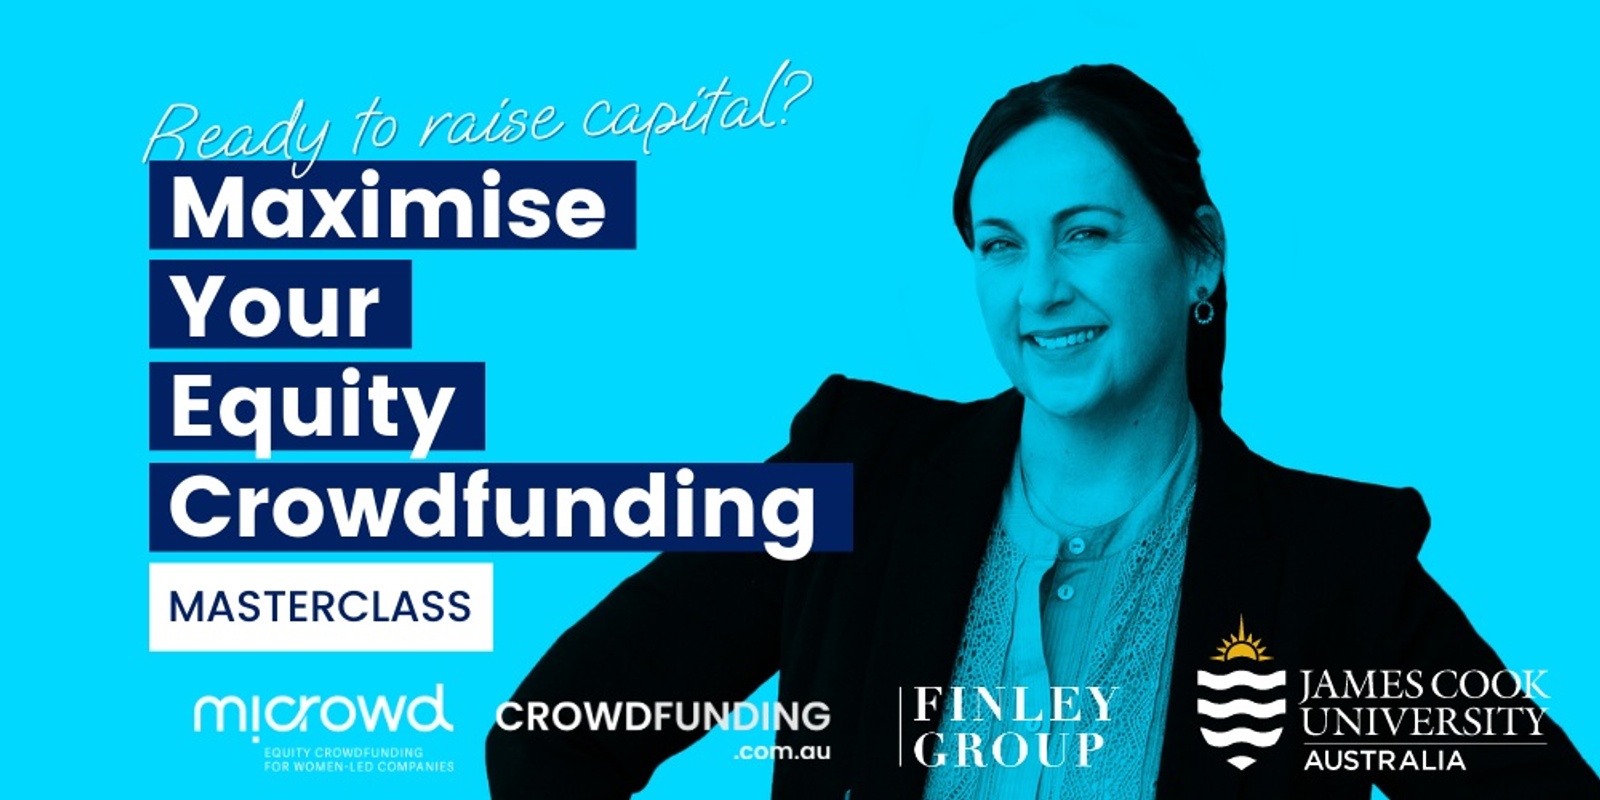 Banner image for Jame Cook University - Equity Crowdfunding Masterclass